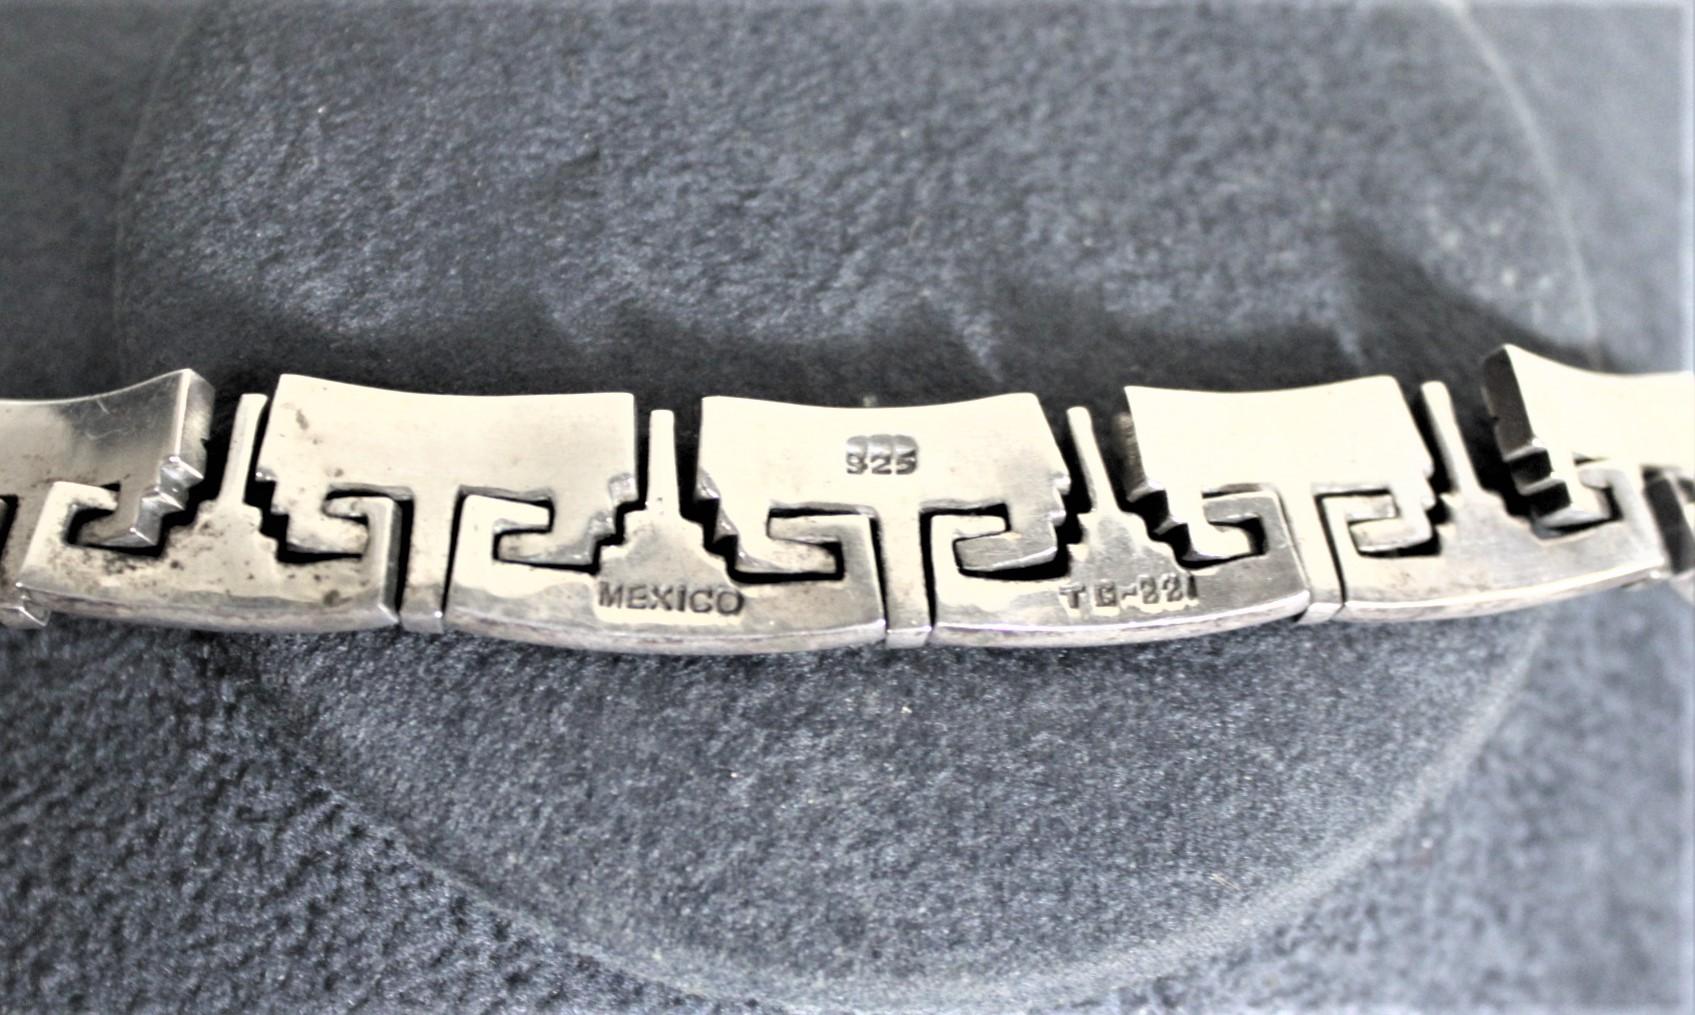 20th Century Mid-Century Modern Mexican Sterling Silver Geometric Linked Choker Necklace For Sale